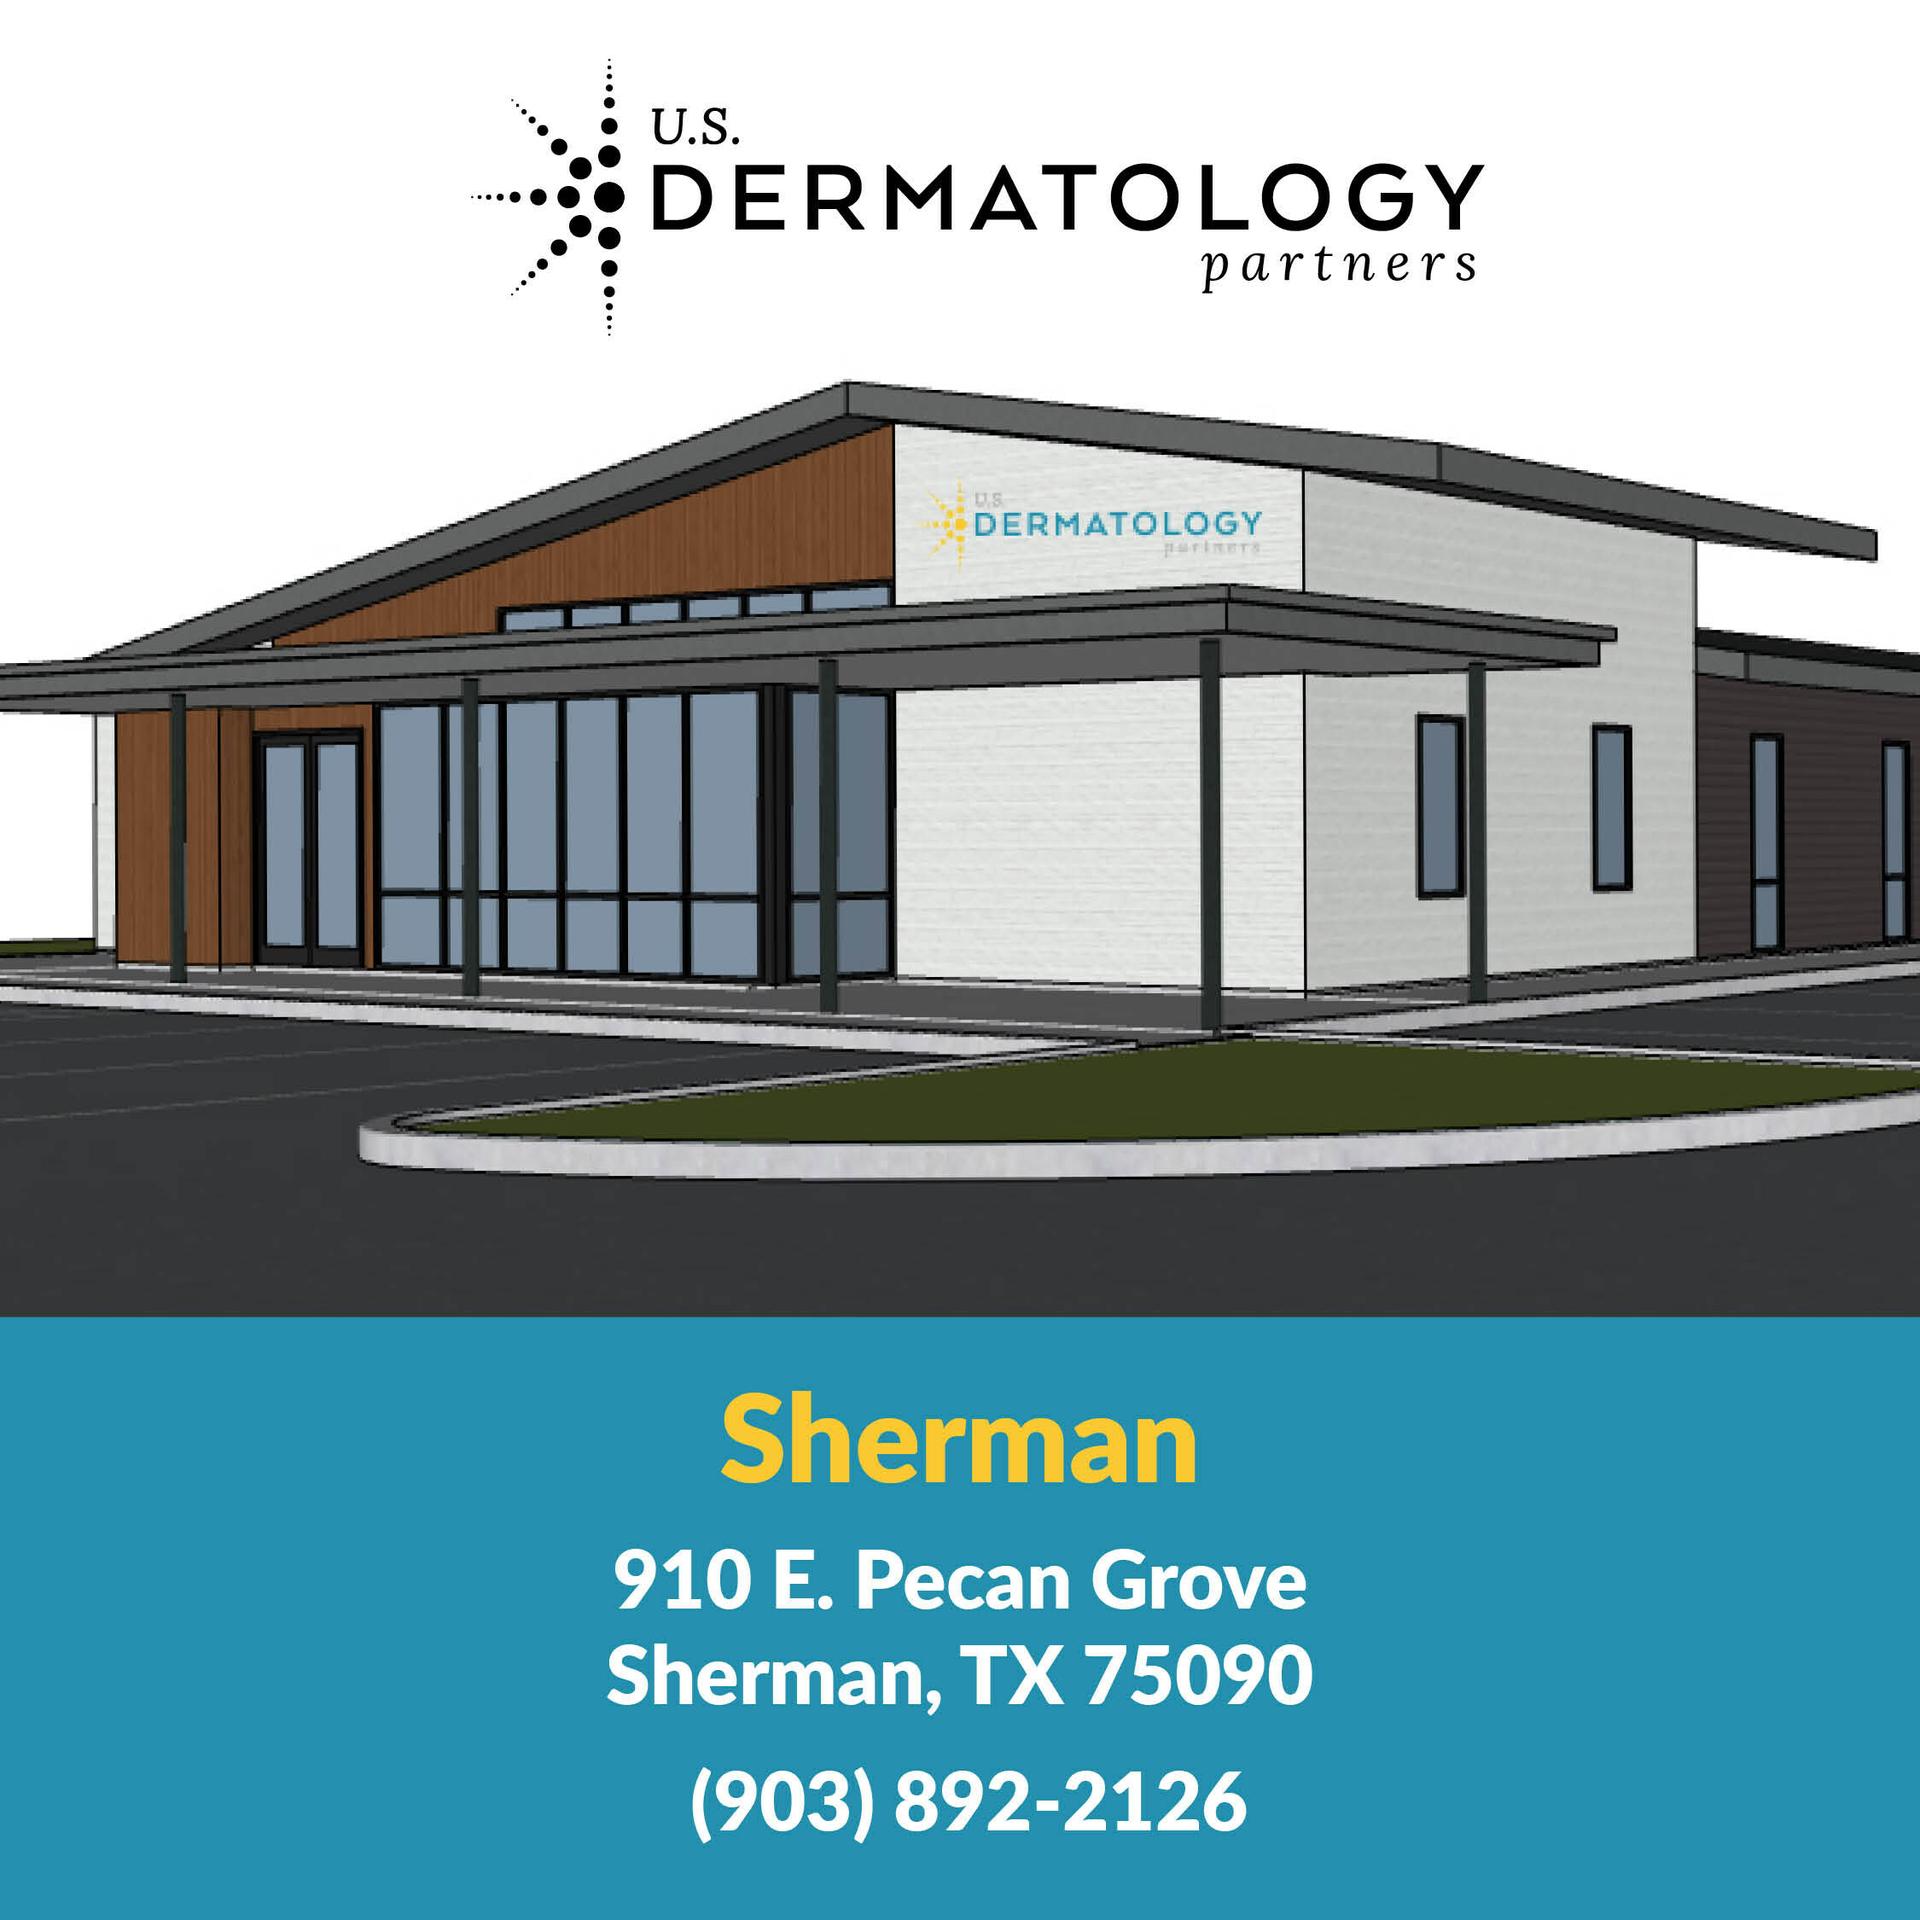 U.S. Dermatology Partners Relocates Sherman Office to Expanded Facility